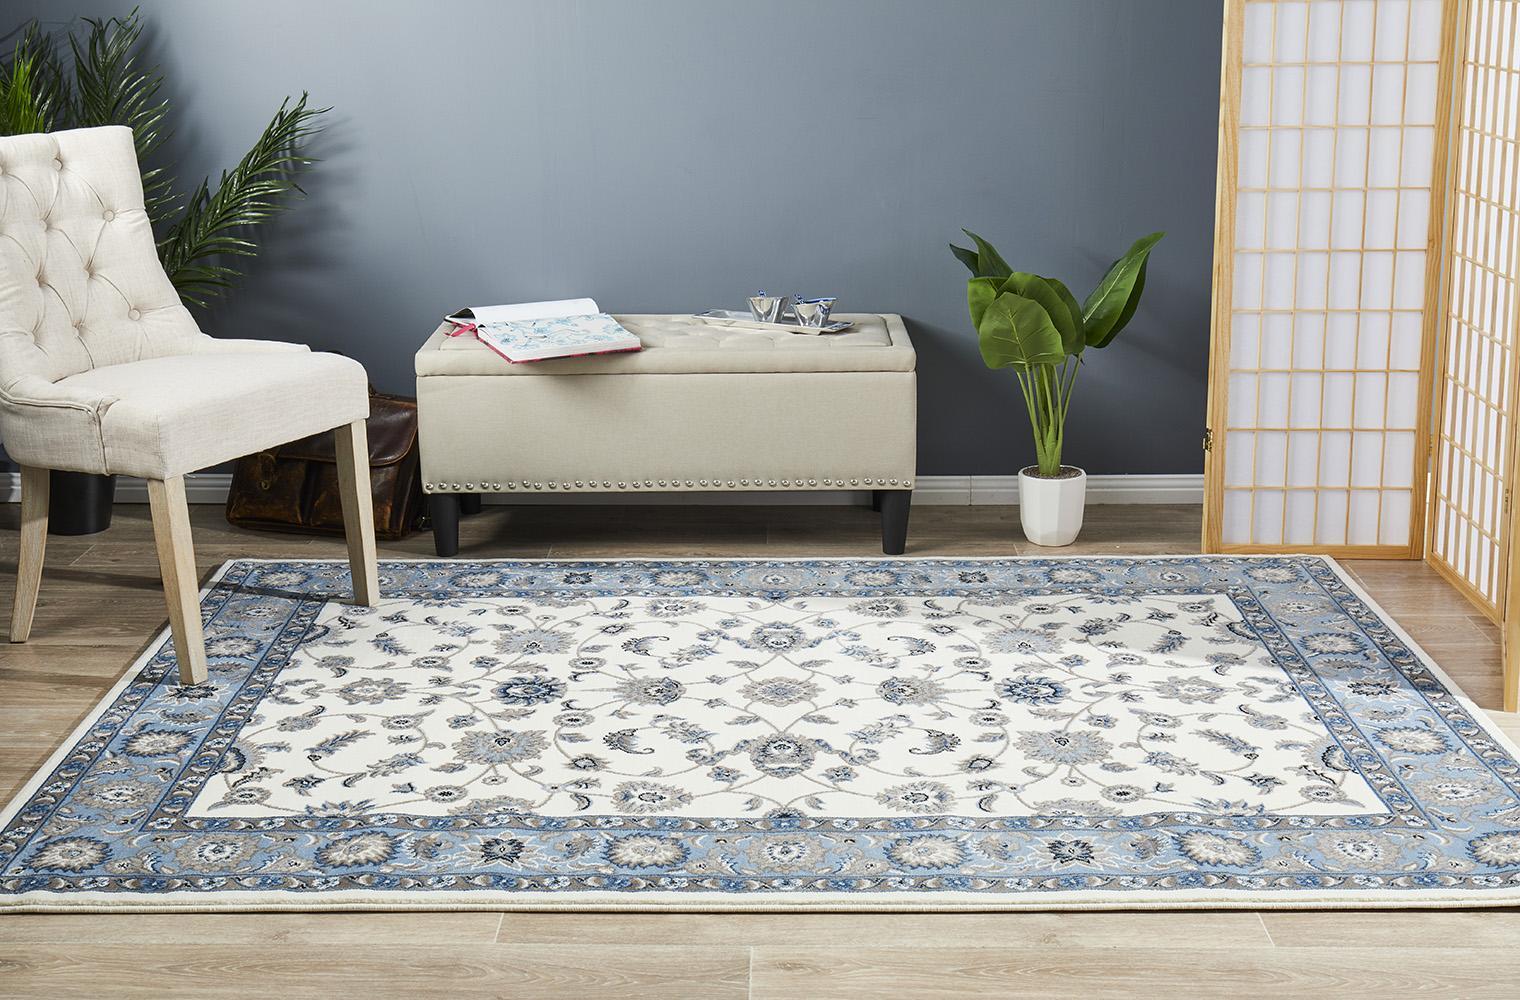 Rug Culture Classic Runner White with Blue Border 400x80cm